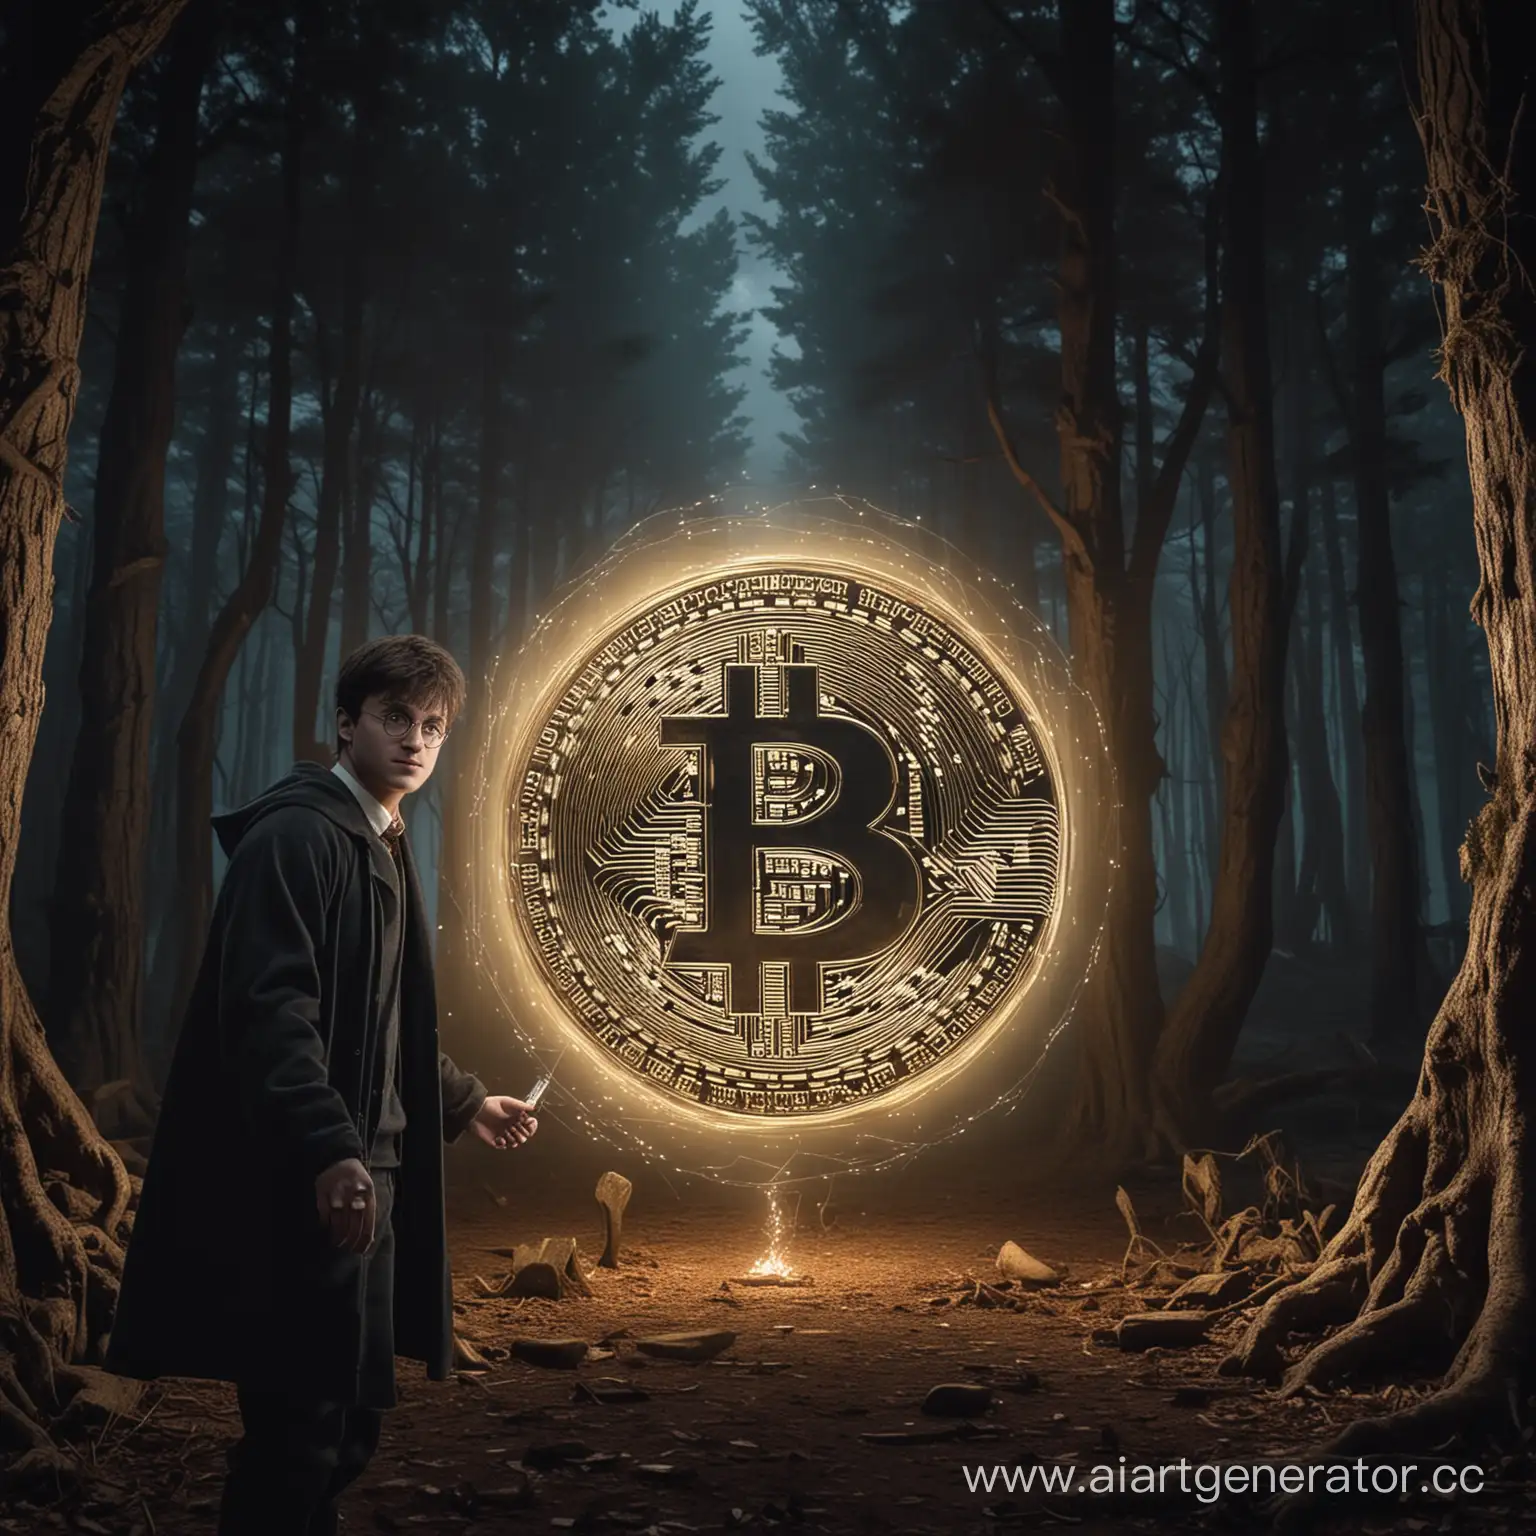 Harry-Potter-Holding-Illuminated-Bitcoin-Piece-in-Forbidden-Forest